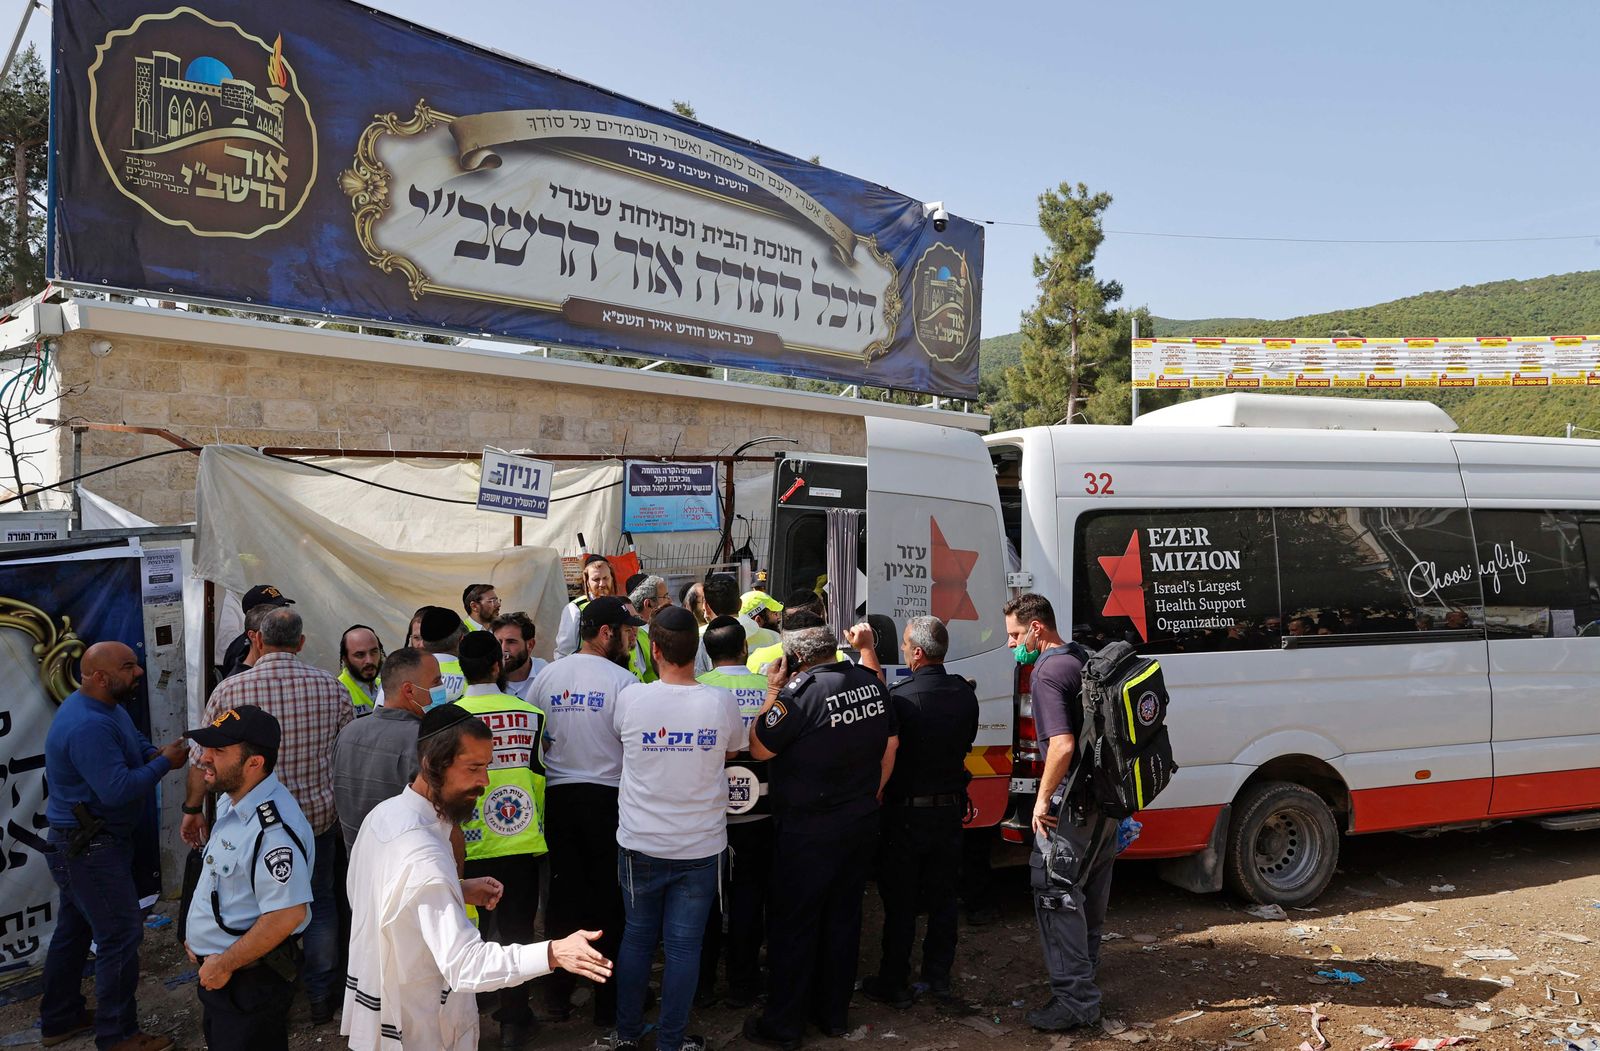 Israeli rescue teams transport victims into an ambulance on April 30, 2021 at the scene of a stampede that took place overnight during a religious gathering in the northern Israeli town of Meron near the reputed tomb of Rabbi Shimon Bar Yochai, a second-century Talmudic sage, where mainly ultra-Orthodox Jews flock to mark the Lag BaOmer holiday. - A massive stampede at the densely packed Jewish pilgrimage site killed at least 44 people in northern Israel early in the morning, with rescue workers facing chaotic crowds while trying to evacuate the injured. (Photo by JACK GUEZ / AFP) - AFP